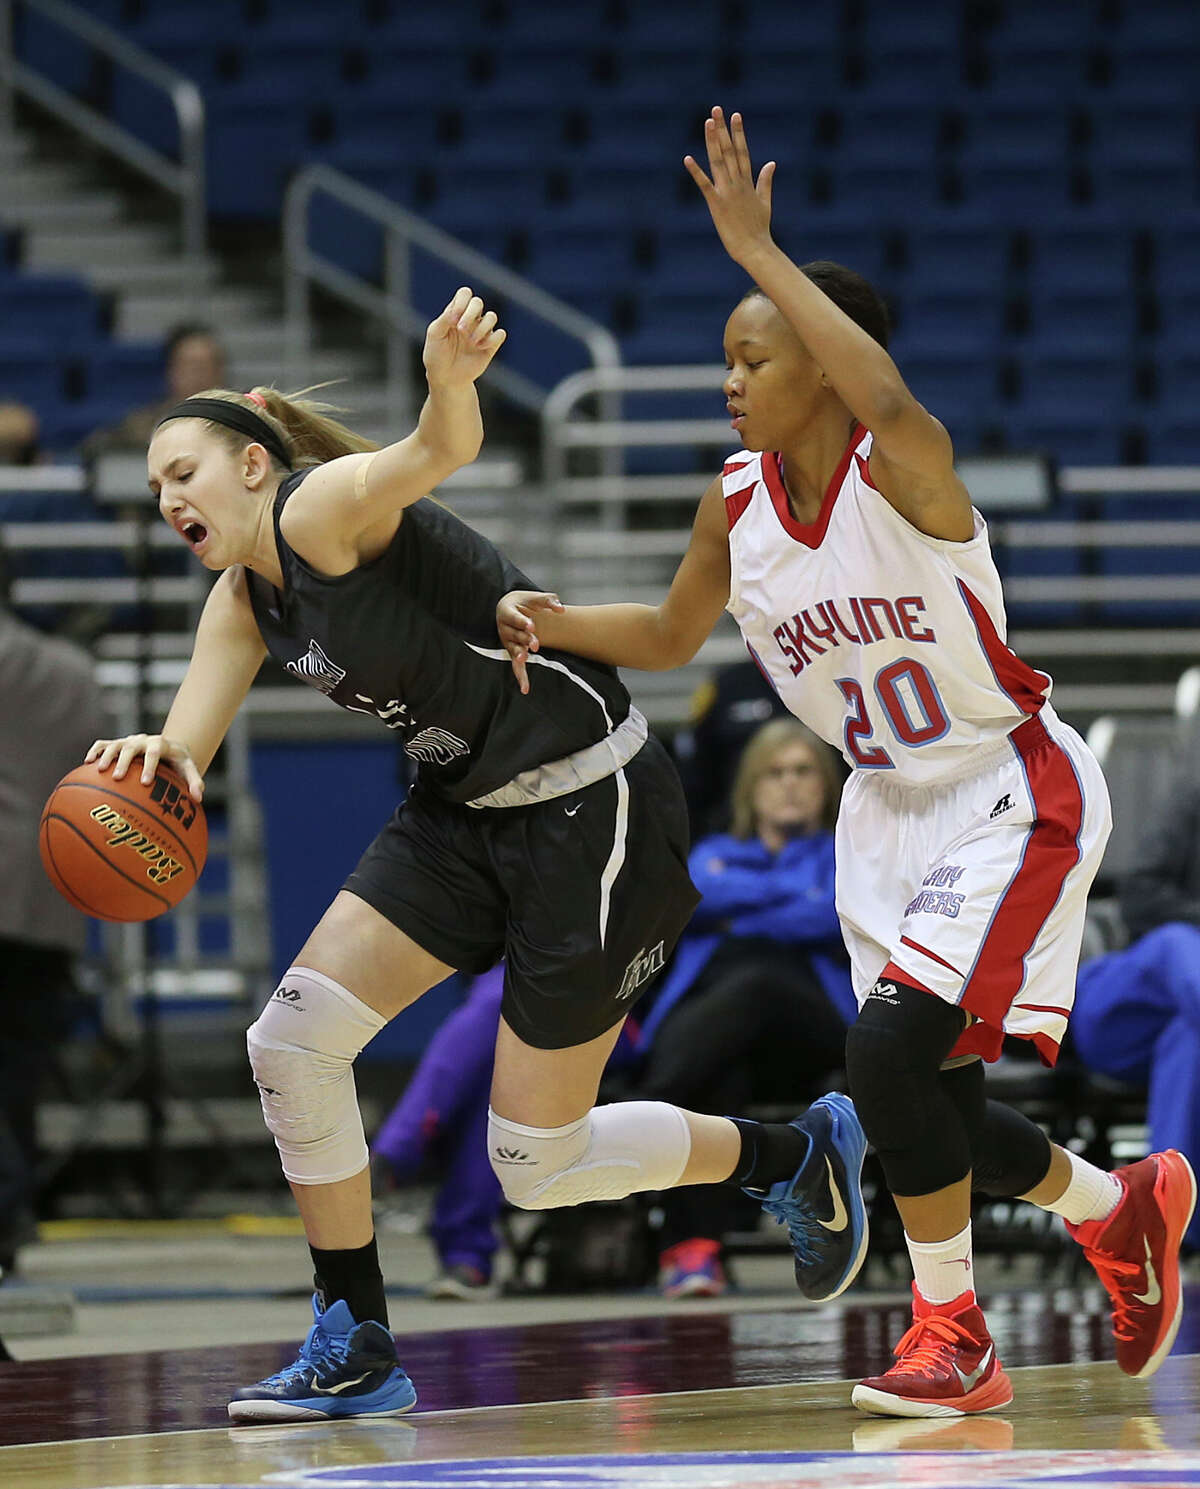 Lewisville Flower Mound's Lauren Cox drives the ball under pressure from Dallas Skyline's Dai'Ja Thomas during the first half of the UIL Girls Basketball State 6A semifinals at the Alamodome, Friday, March 6, 2015. This is the first time the event is in San Antonio, and the first time in more than 90 years it's not being held in Austin.